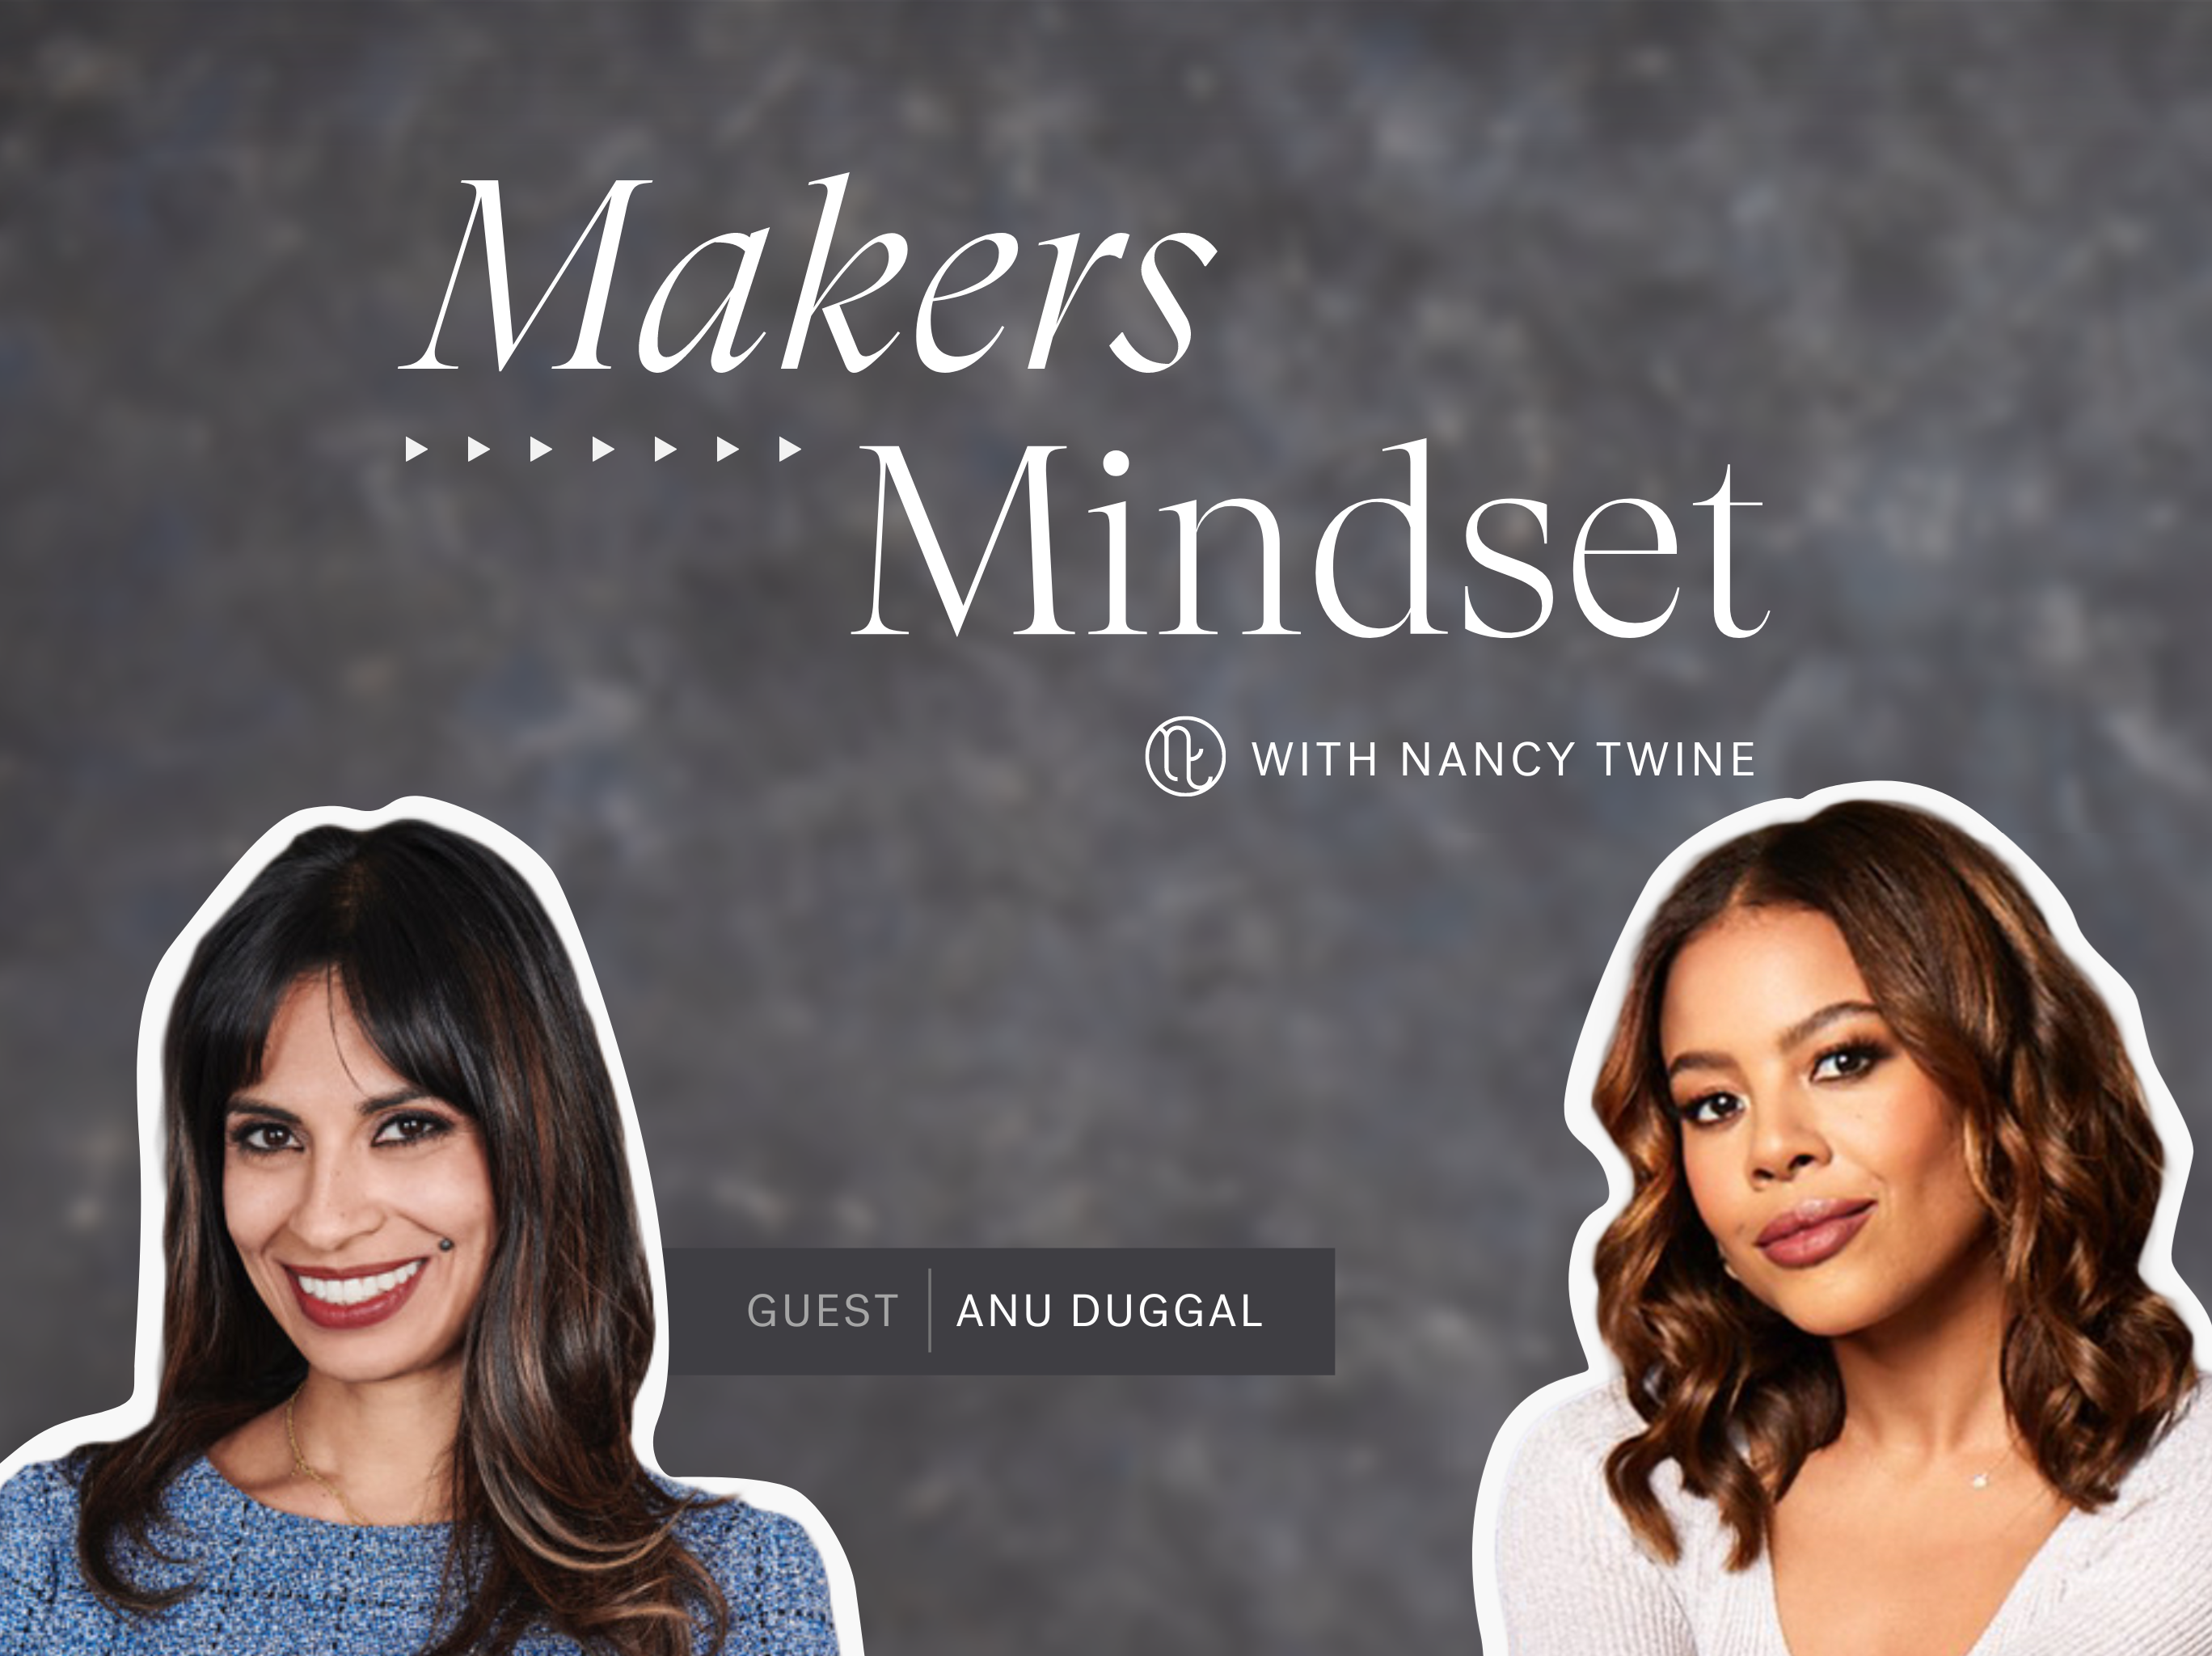 Cover image for Makers Mindset Season 1 Episode 6 hosted by Nancy Twine with Anu Duggal, Founding Partner of Female Founders Fund